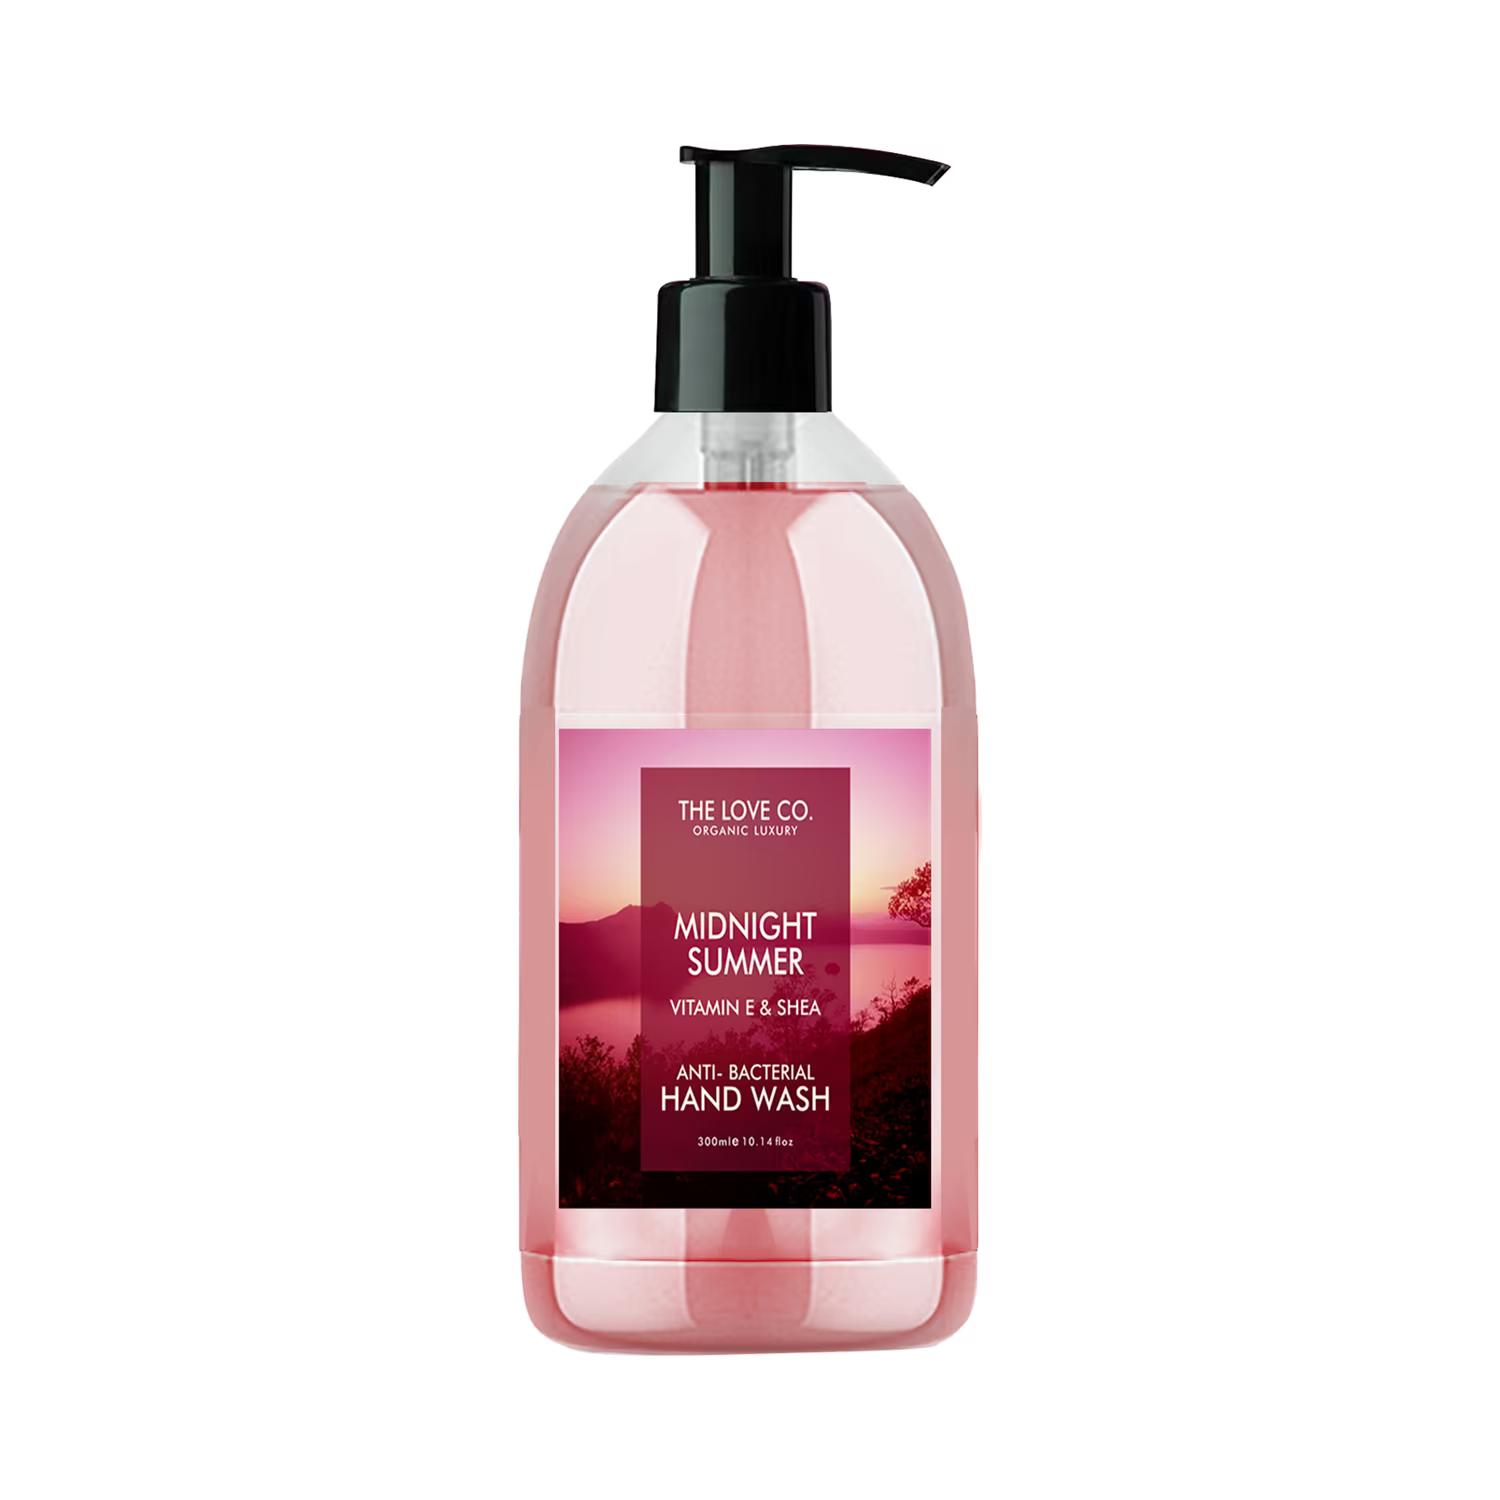 THE LOVE CO. Midnight Summer Hand Wash For Moisturized Hand - 300ml